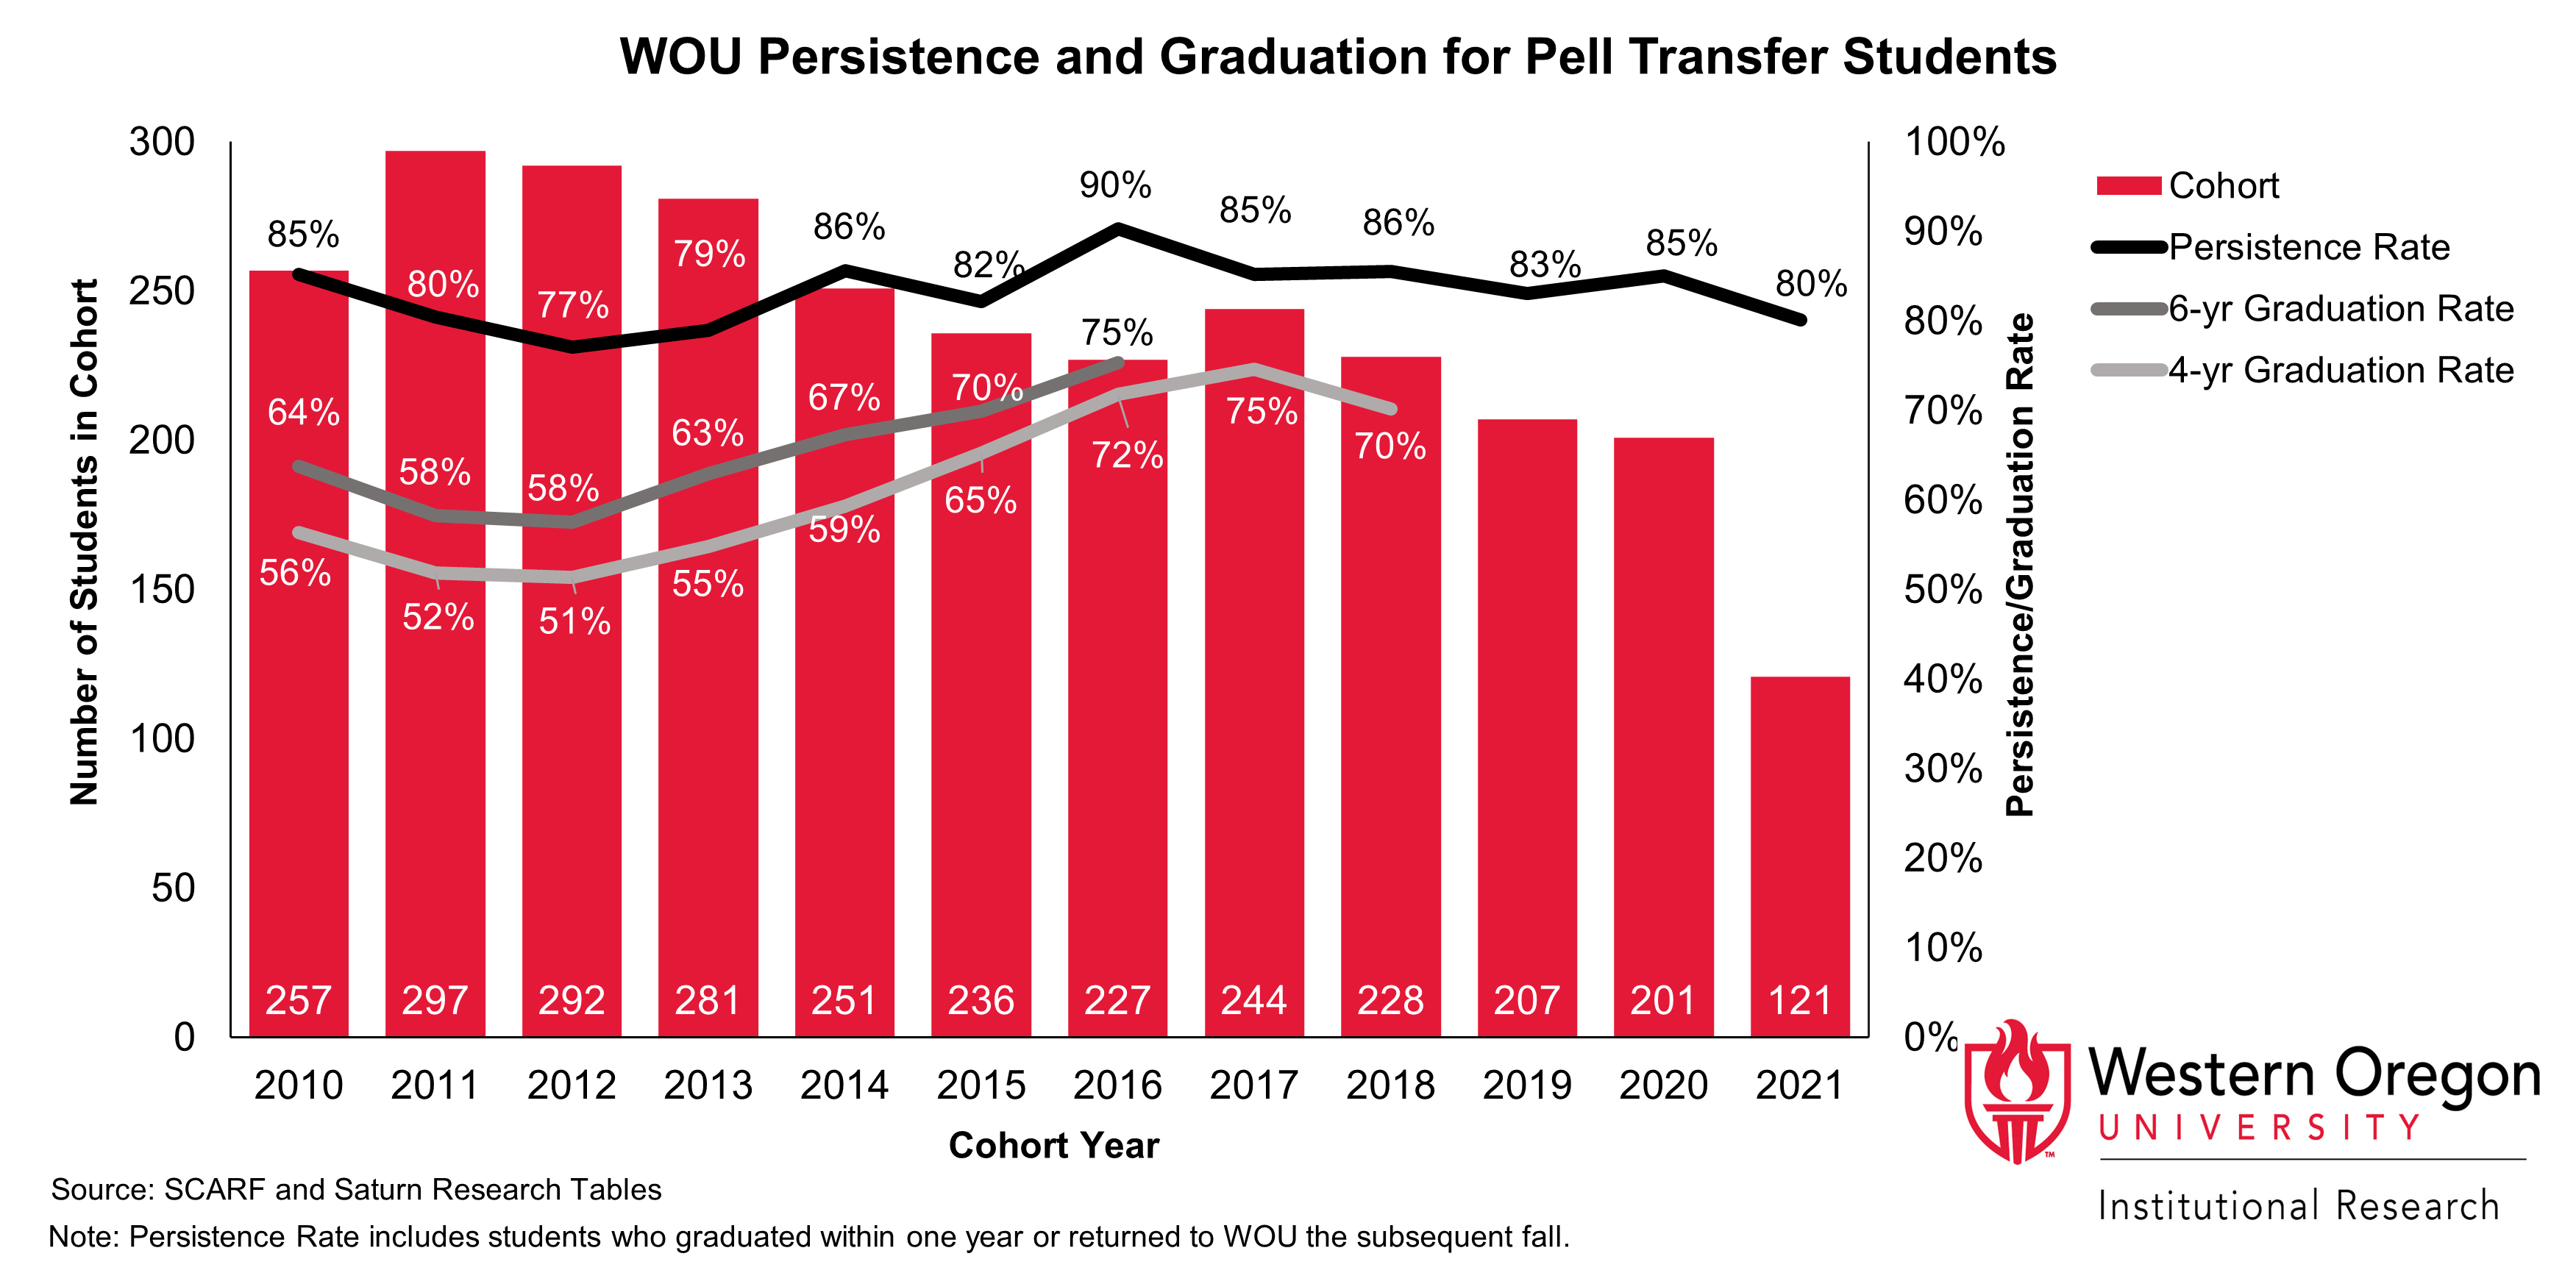 Bar and line graph of retention and 4- and 6-year graduation rates since 2010 for WOU transfer students that are Pell recipients, showing that graduation rates have been steadily increasing while persistance rates have remained largely stable